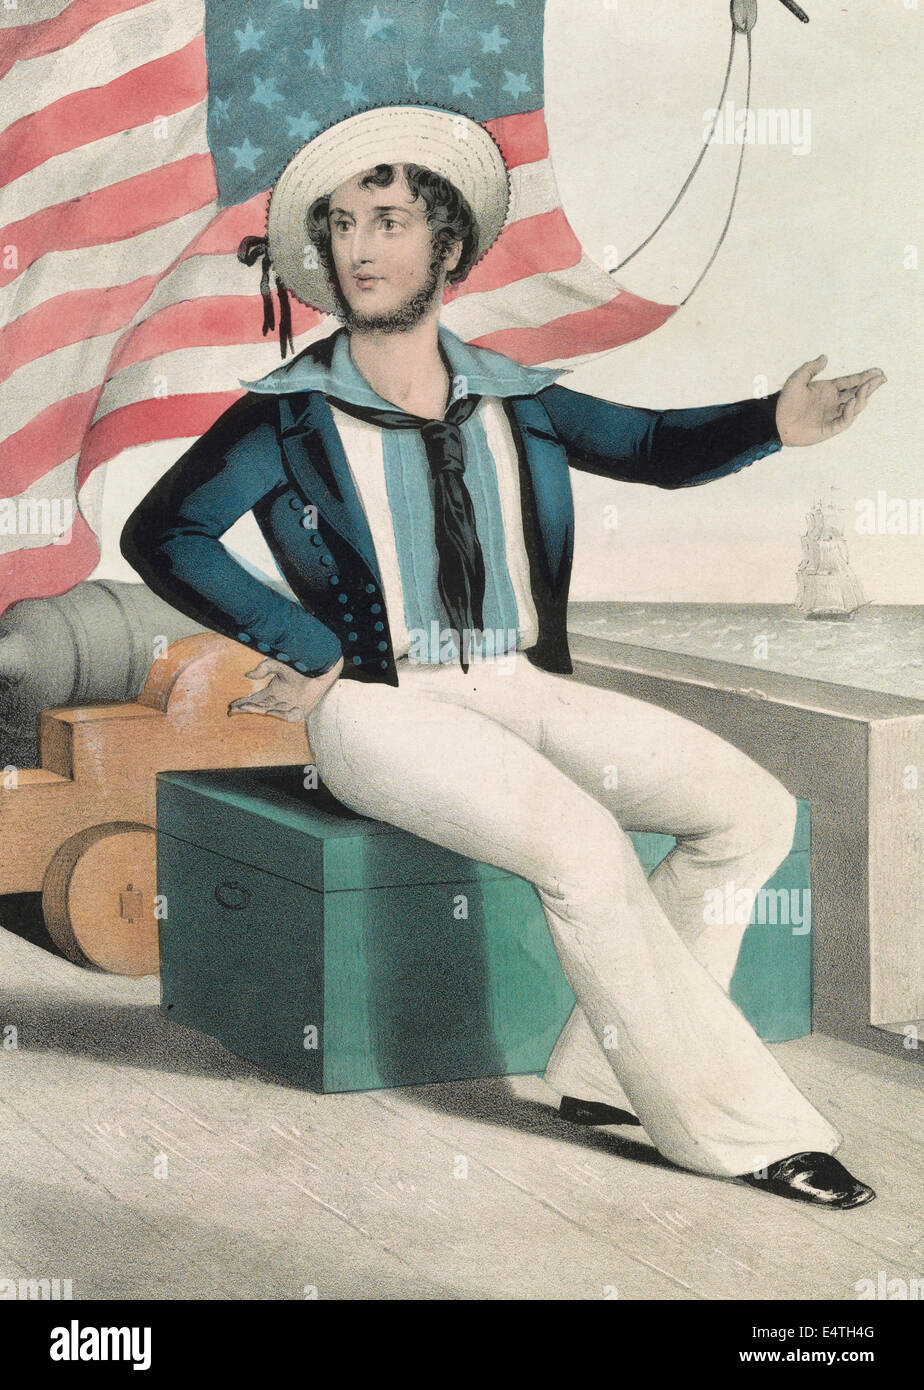 L'American tar. 'Don't give up the ship' - marin américain, vers 1845 Banque D'Images